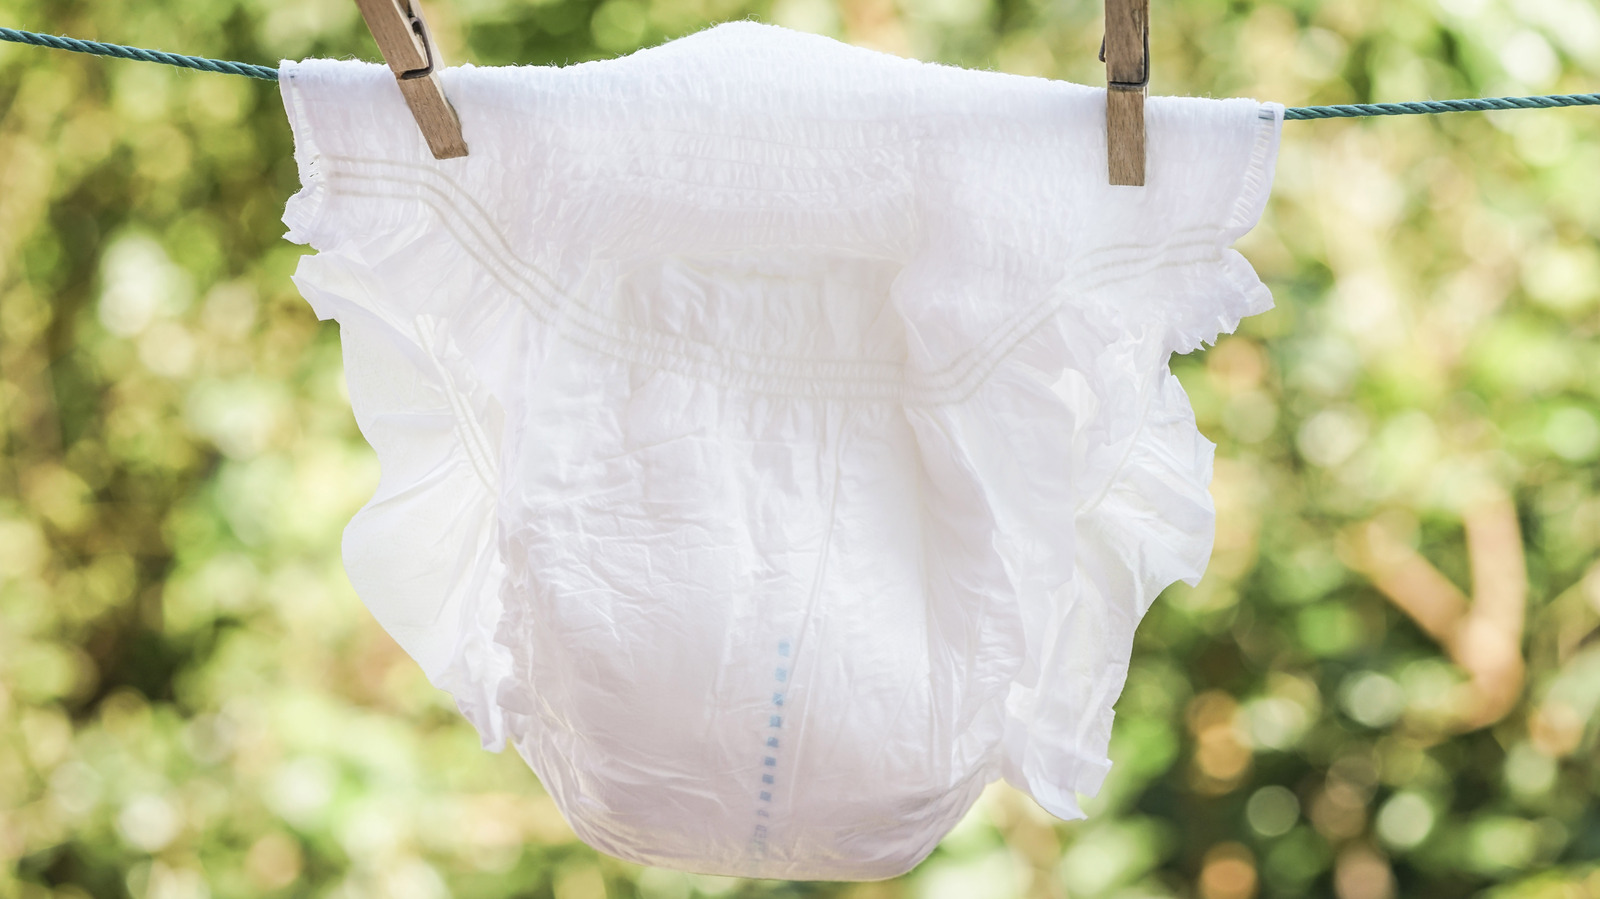 https://www.housedigest.com/img/gallery/why-you-should-steer-clear-of-the-diaper-irrigation-trend/l-intro-1686230510.jpg